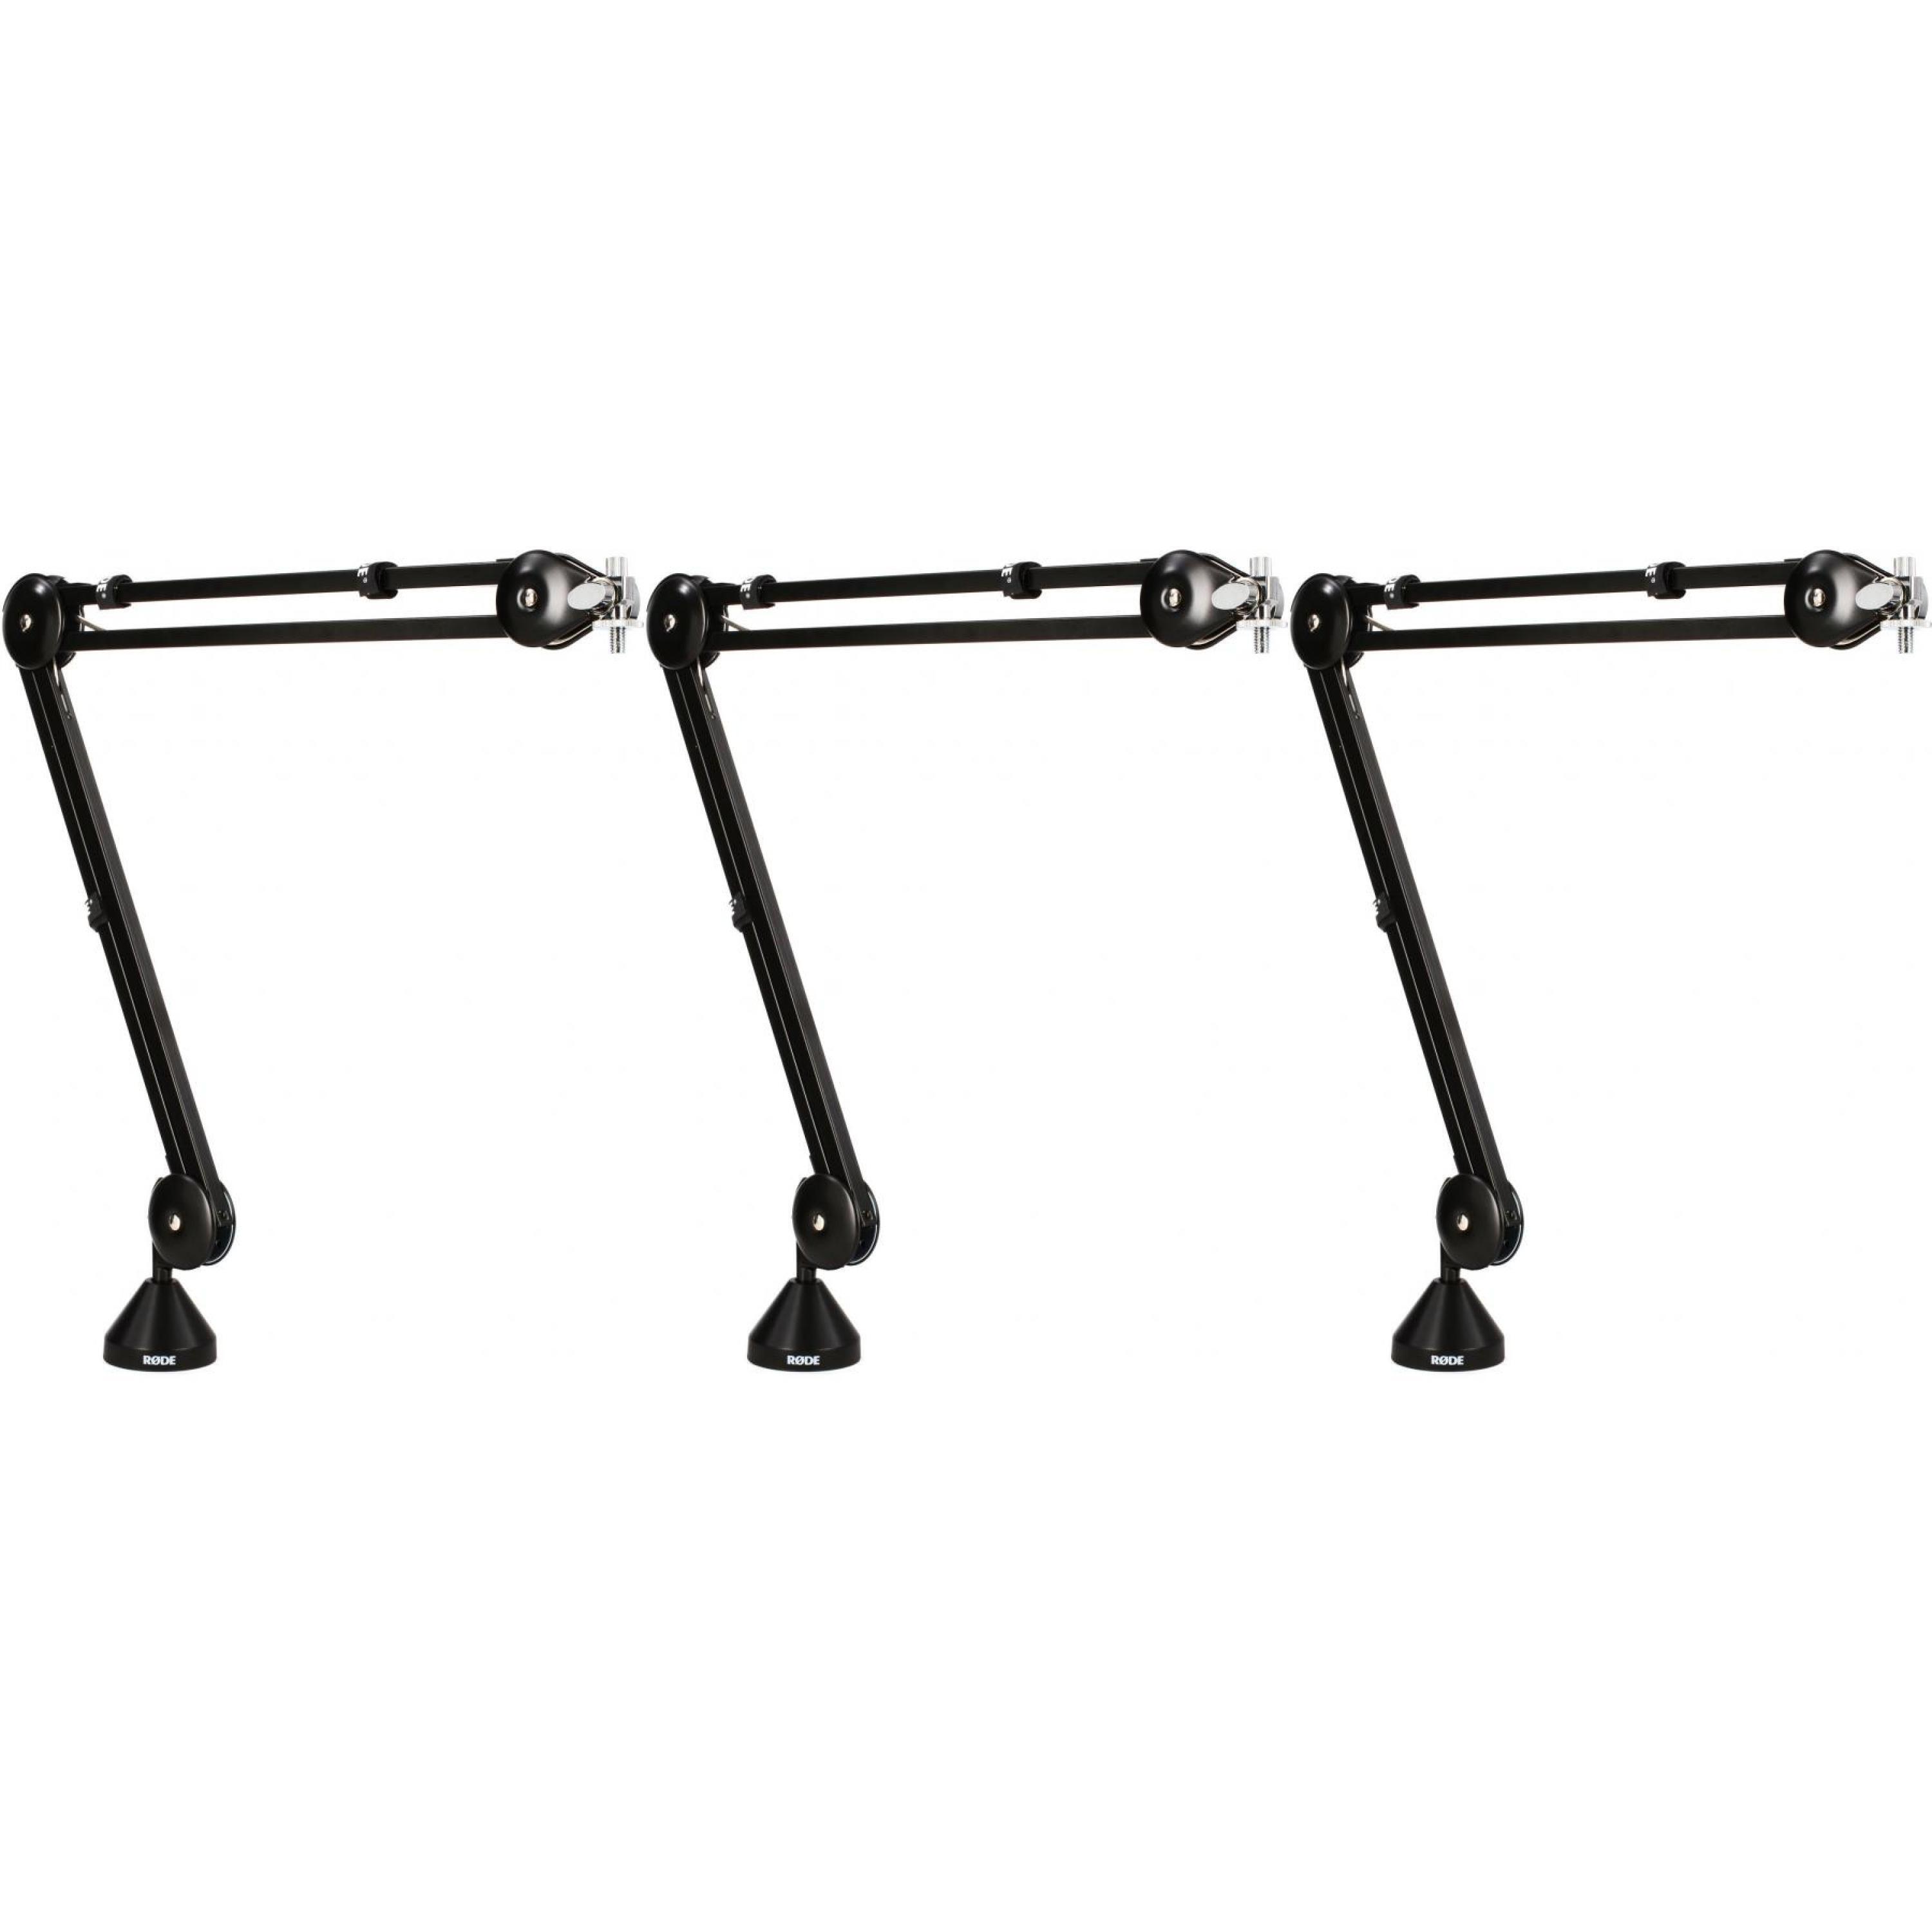 Rode Desk-Mounted Broadcast Microphone Arm 3-pack | Sweetwater